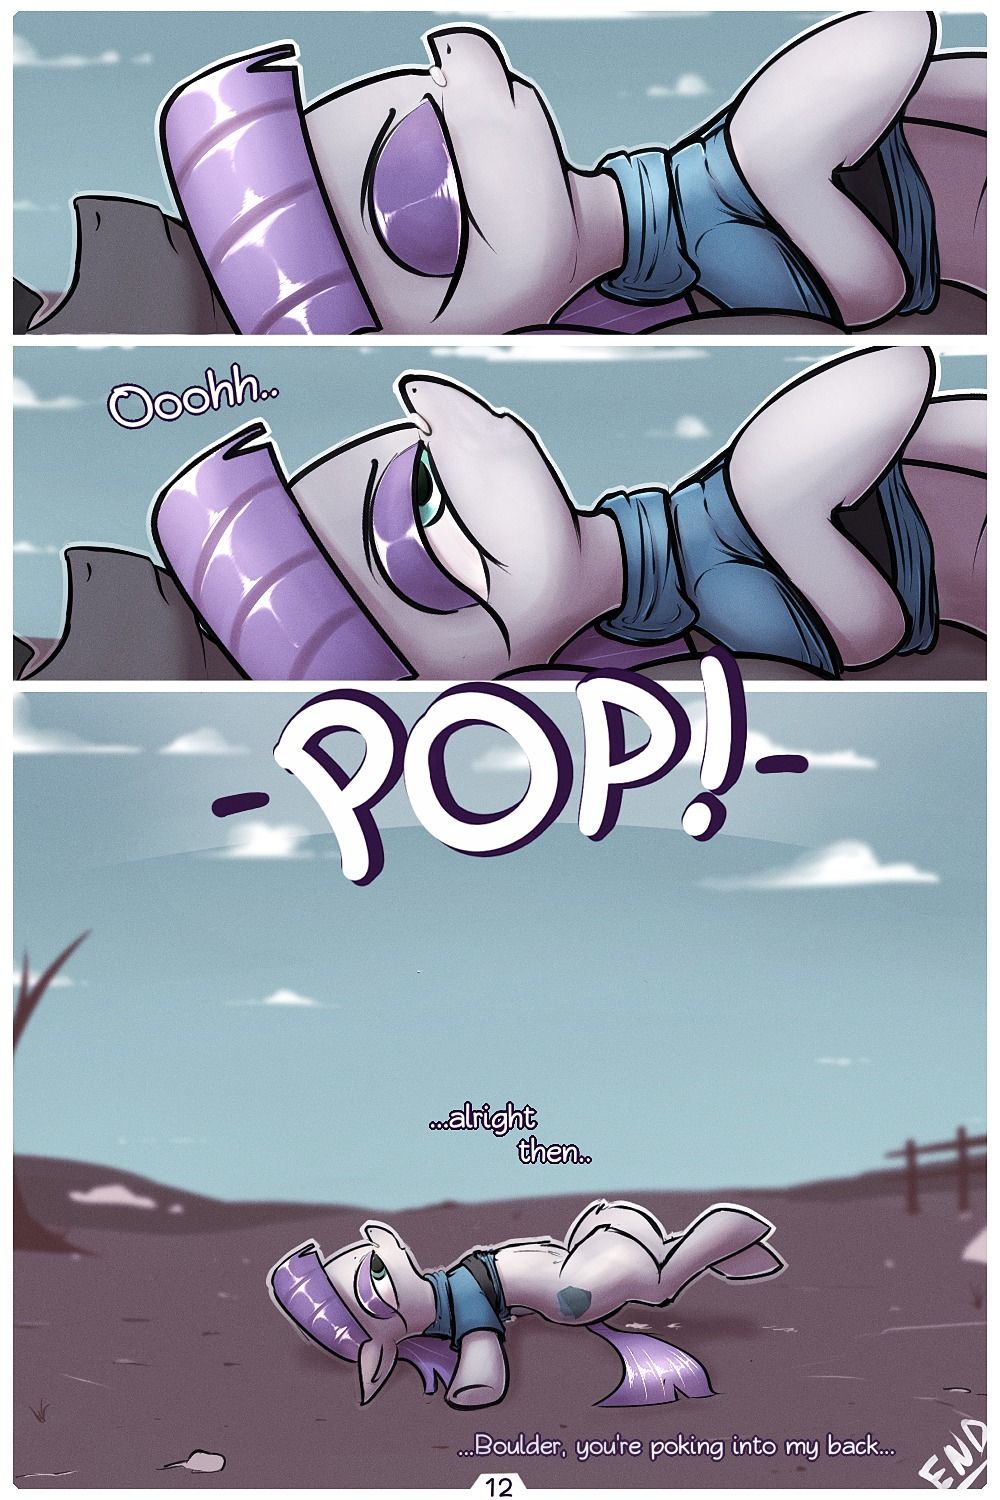 [Ponegranate] Maud Has Sex With a Rock (My Little Pony: Friendship is Magic)